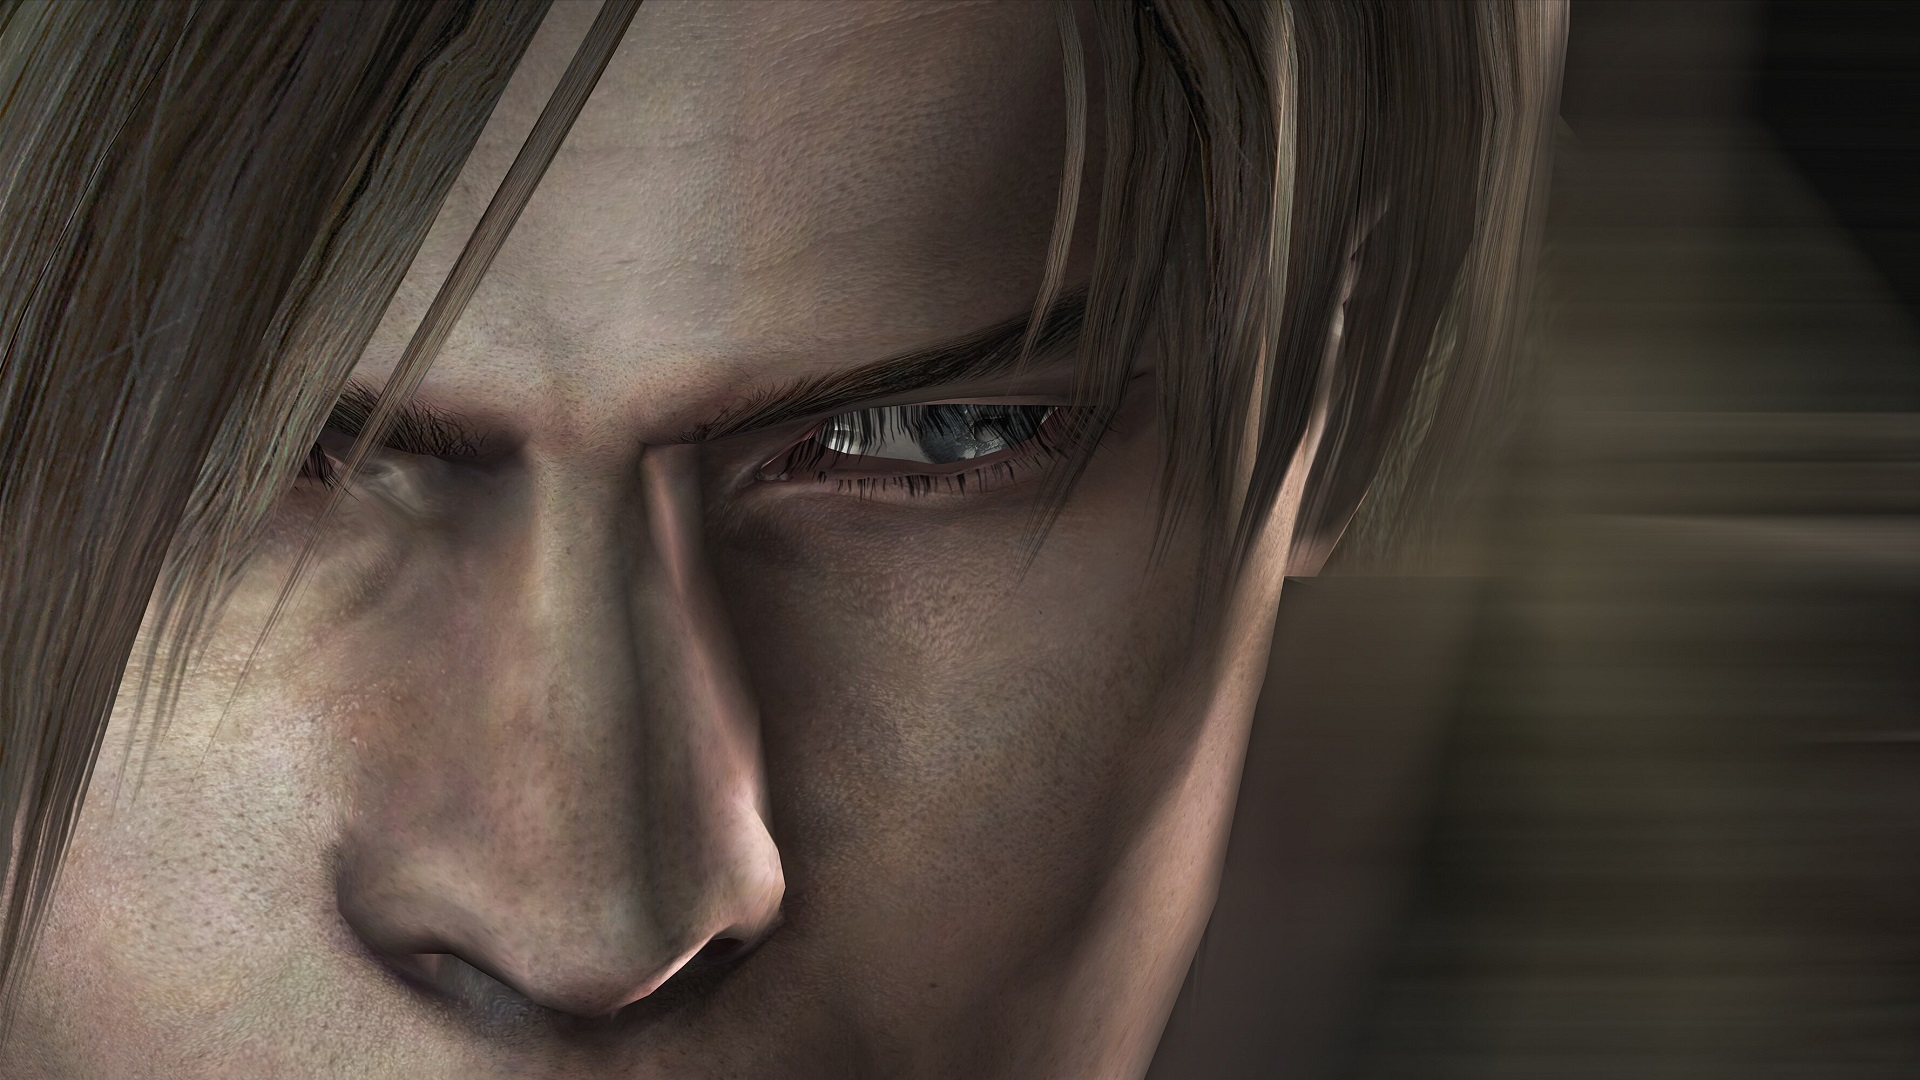 Steam resident evil 4 ultimate hd фото 104